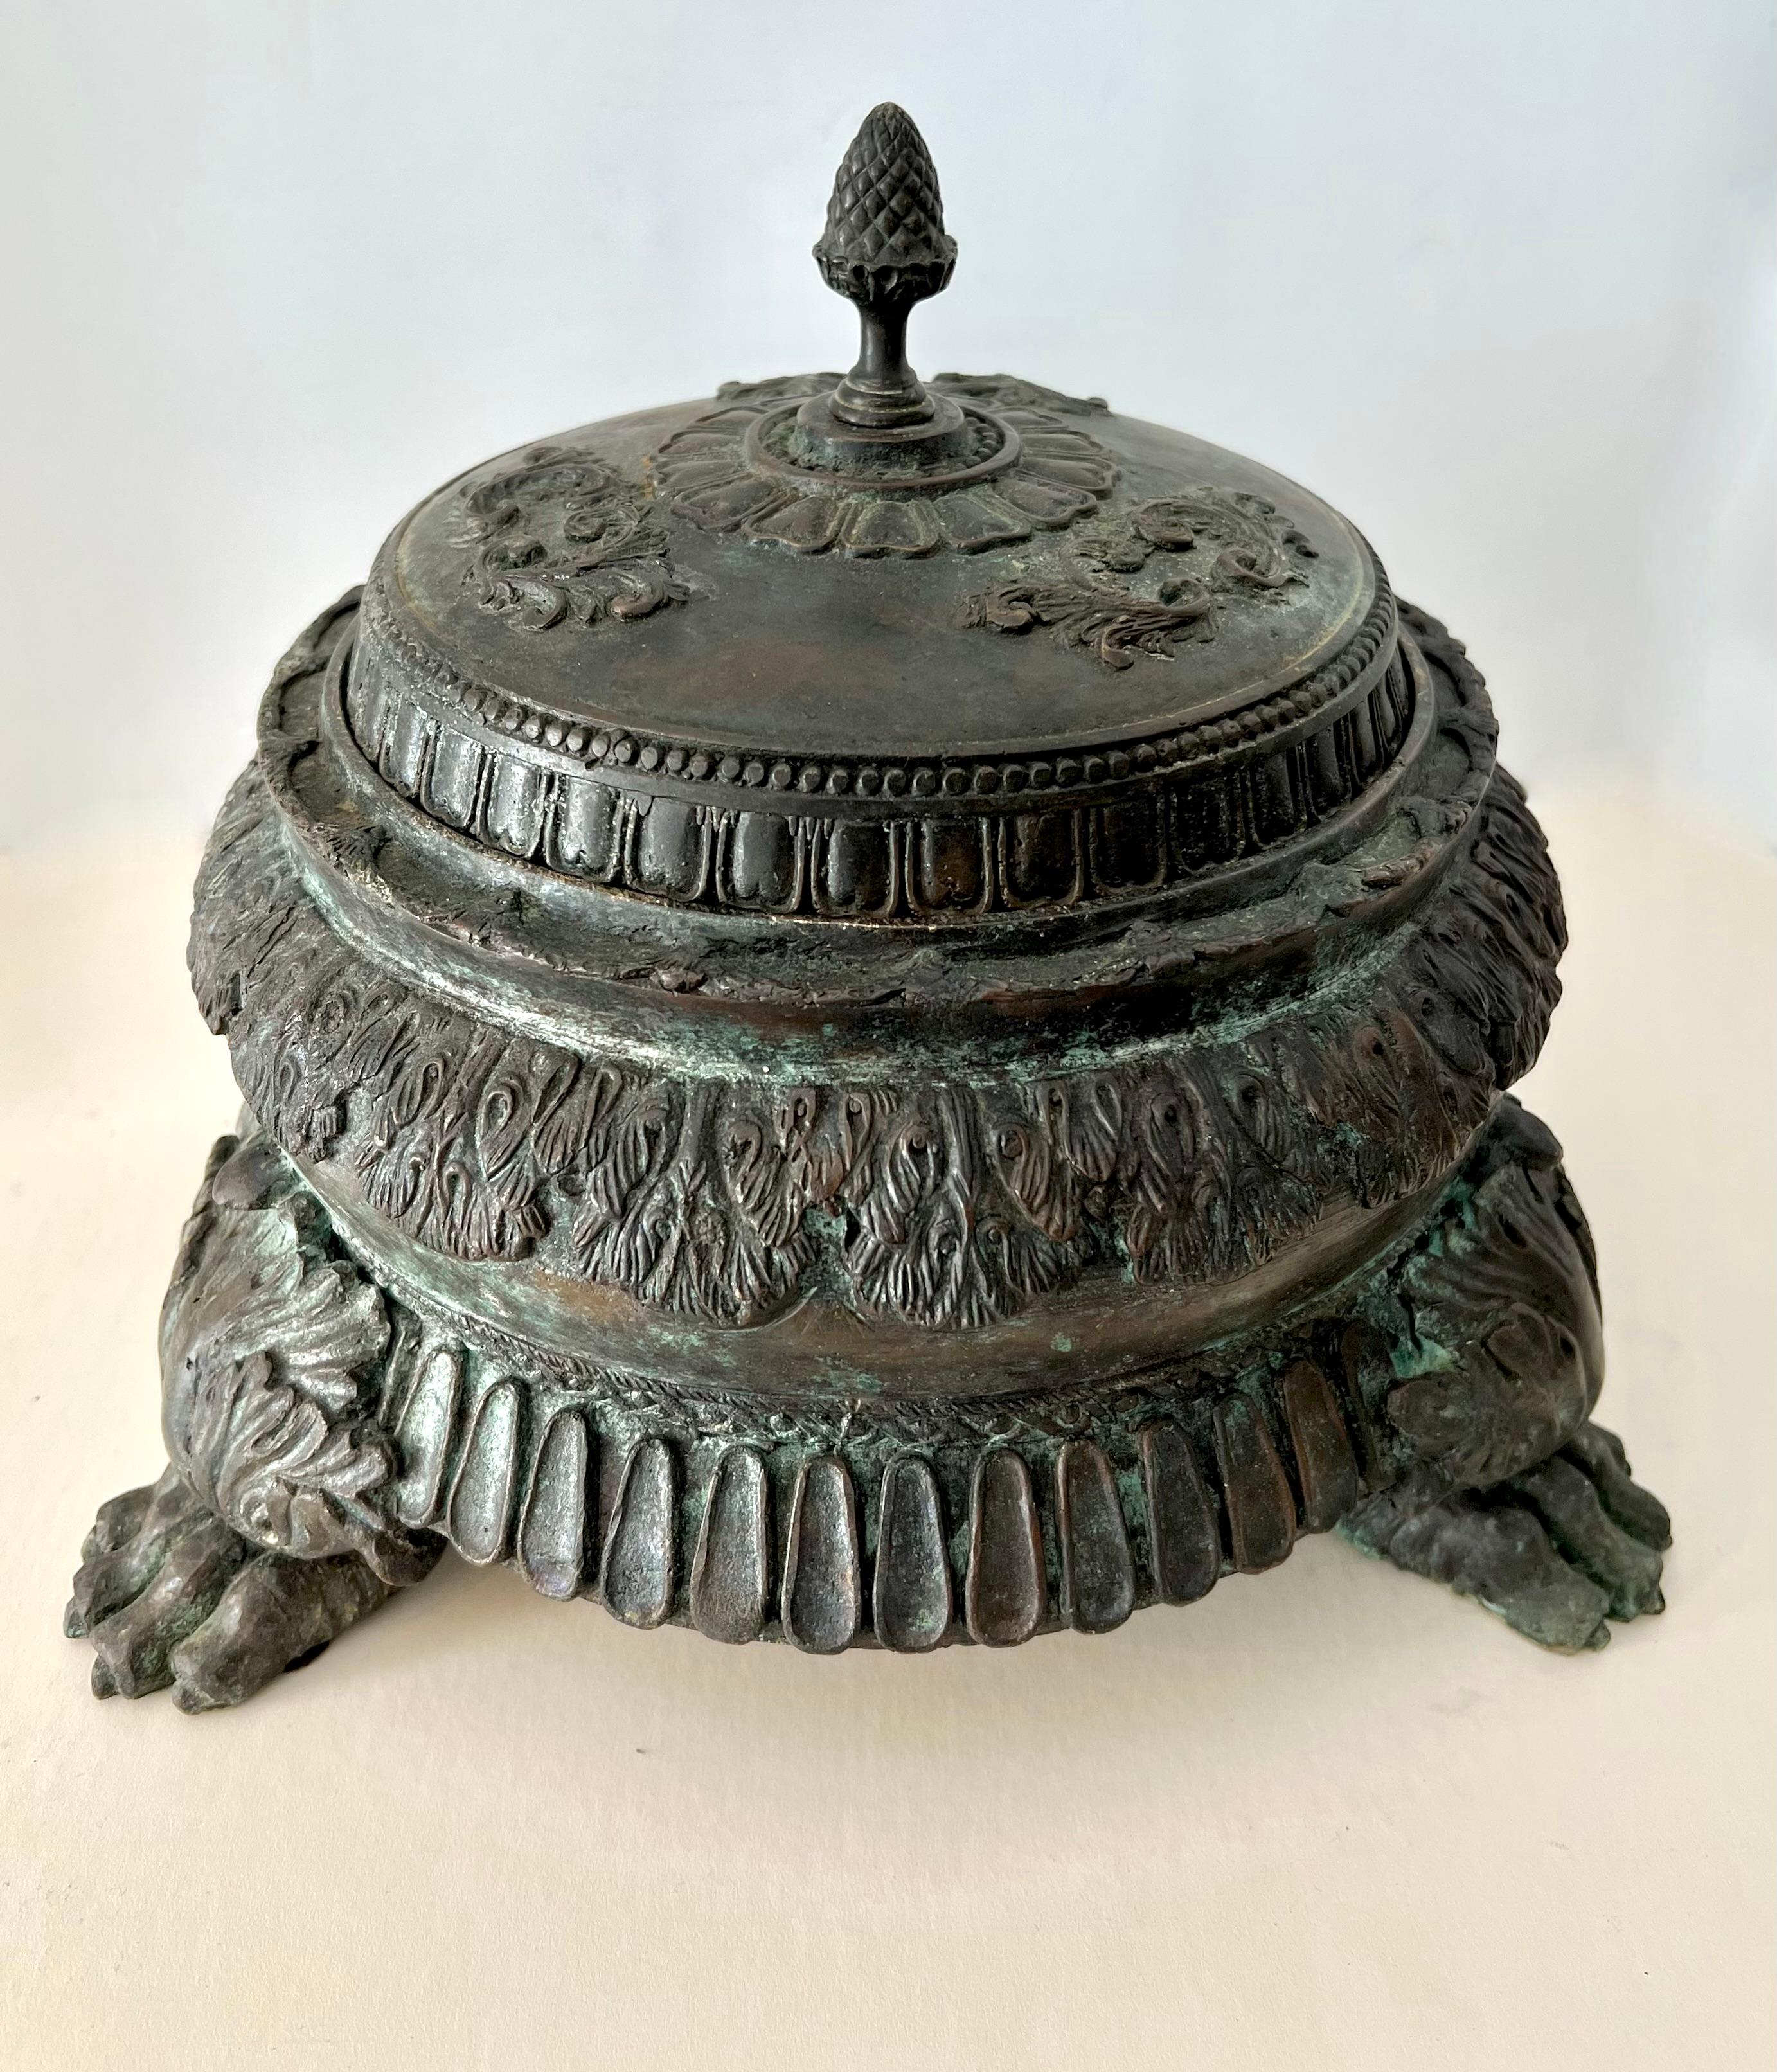 Chinese Bronze Censor believe to be from the 1800's. The pice is very substantial and heavy - the lid removes to reveal a solid bronze platform for incense. A wonderful piece and highly decorative.